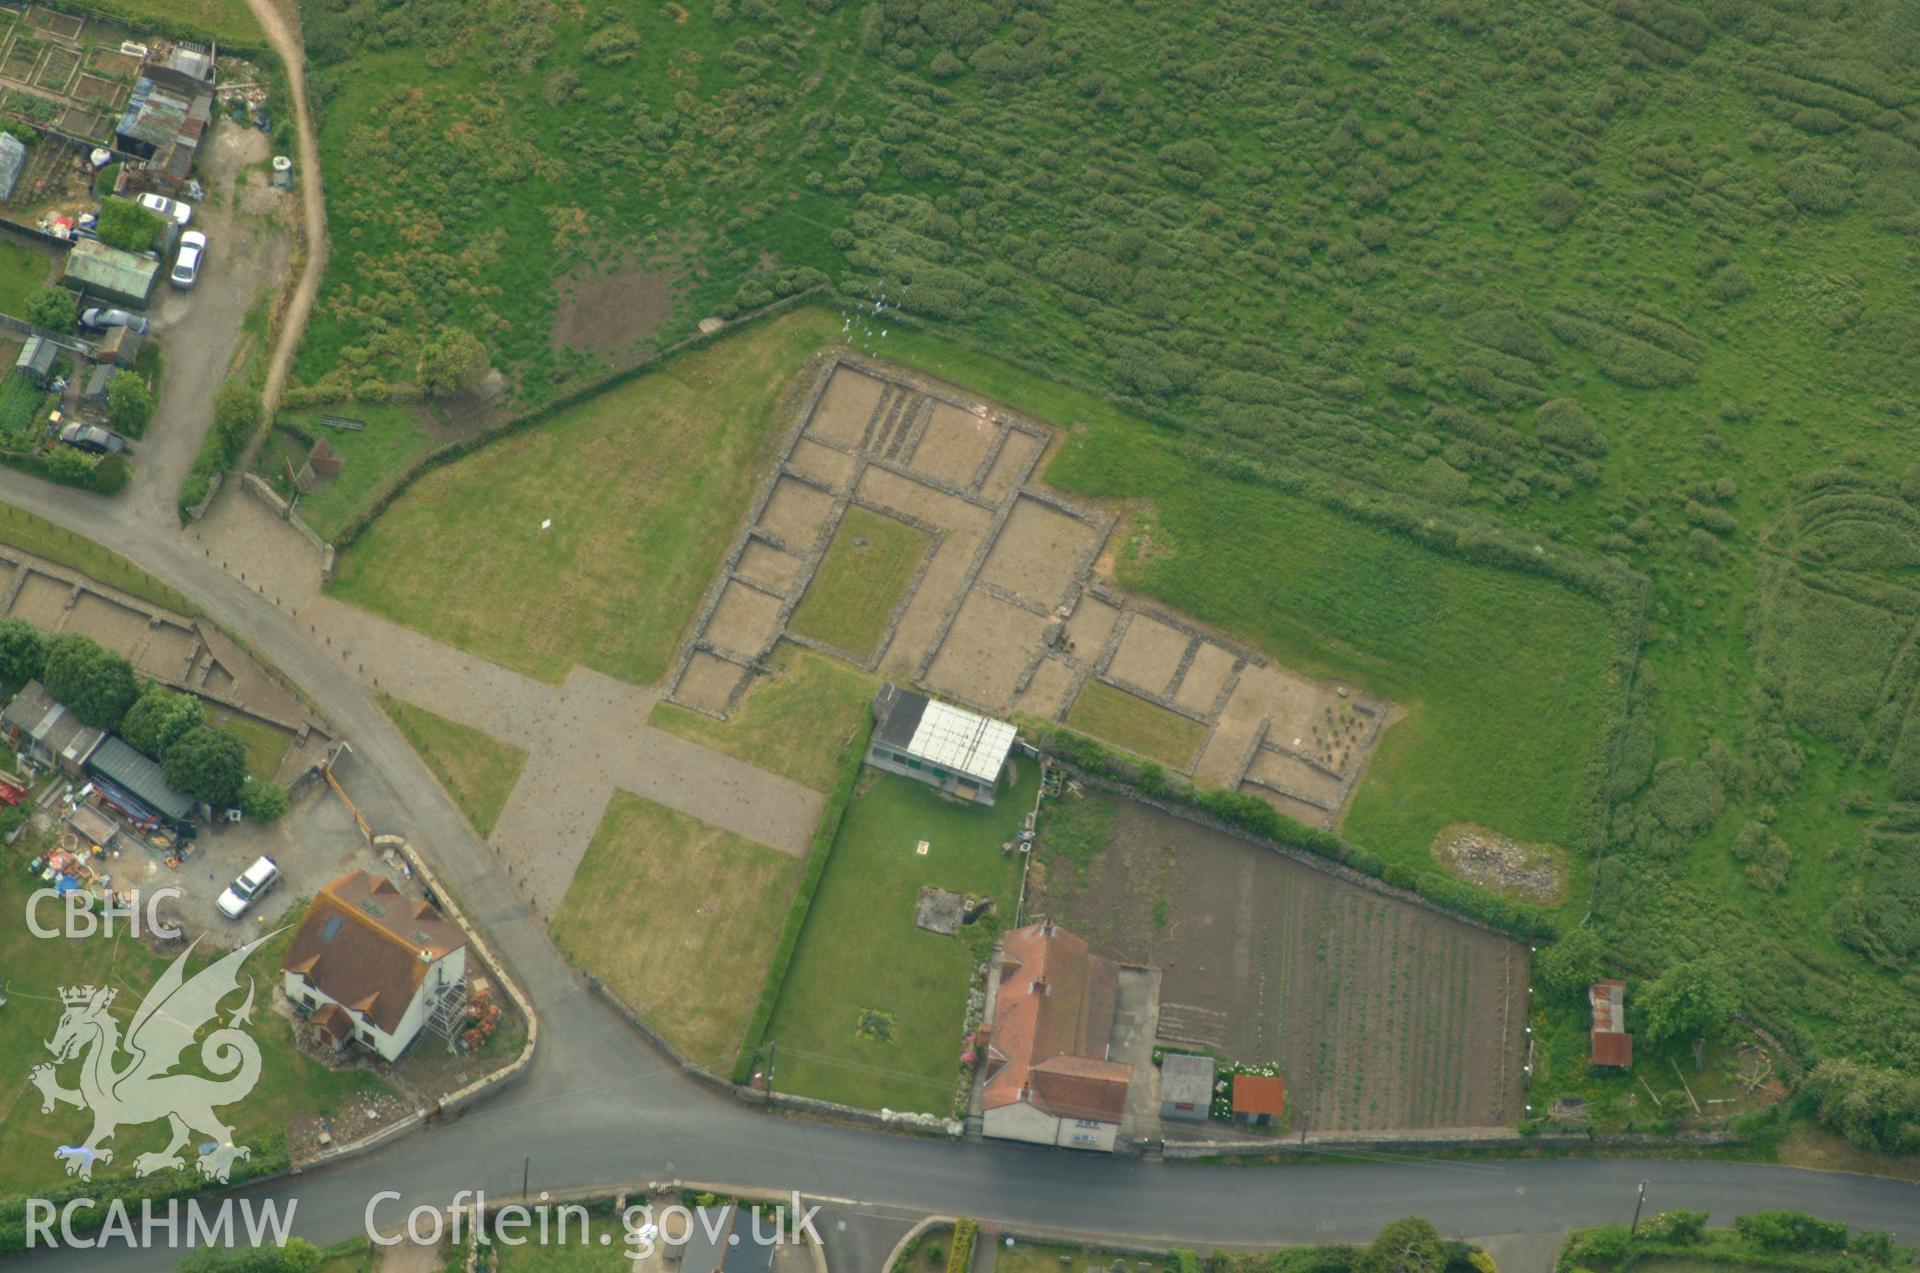 RCAHMW colour oblique aerial photograph of Caerwent Roman Town (Venta Silurum) taken on 26/05/2004 by Toby Driver